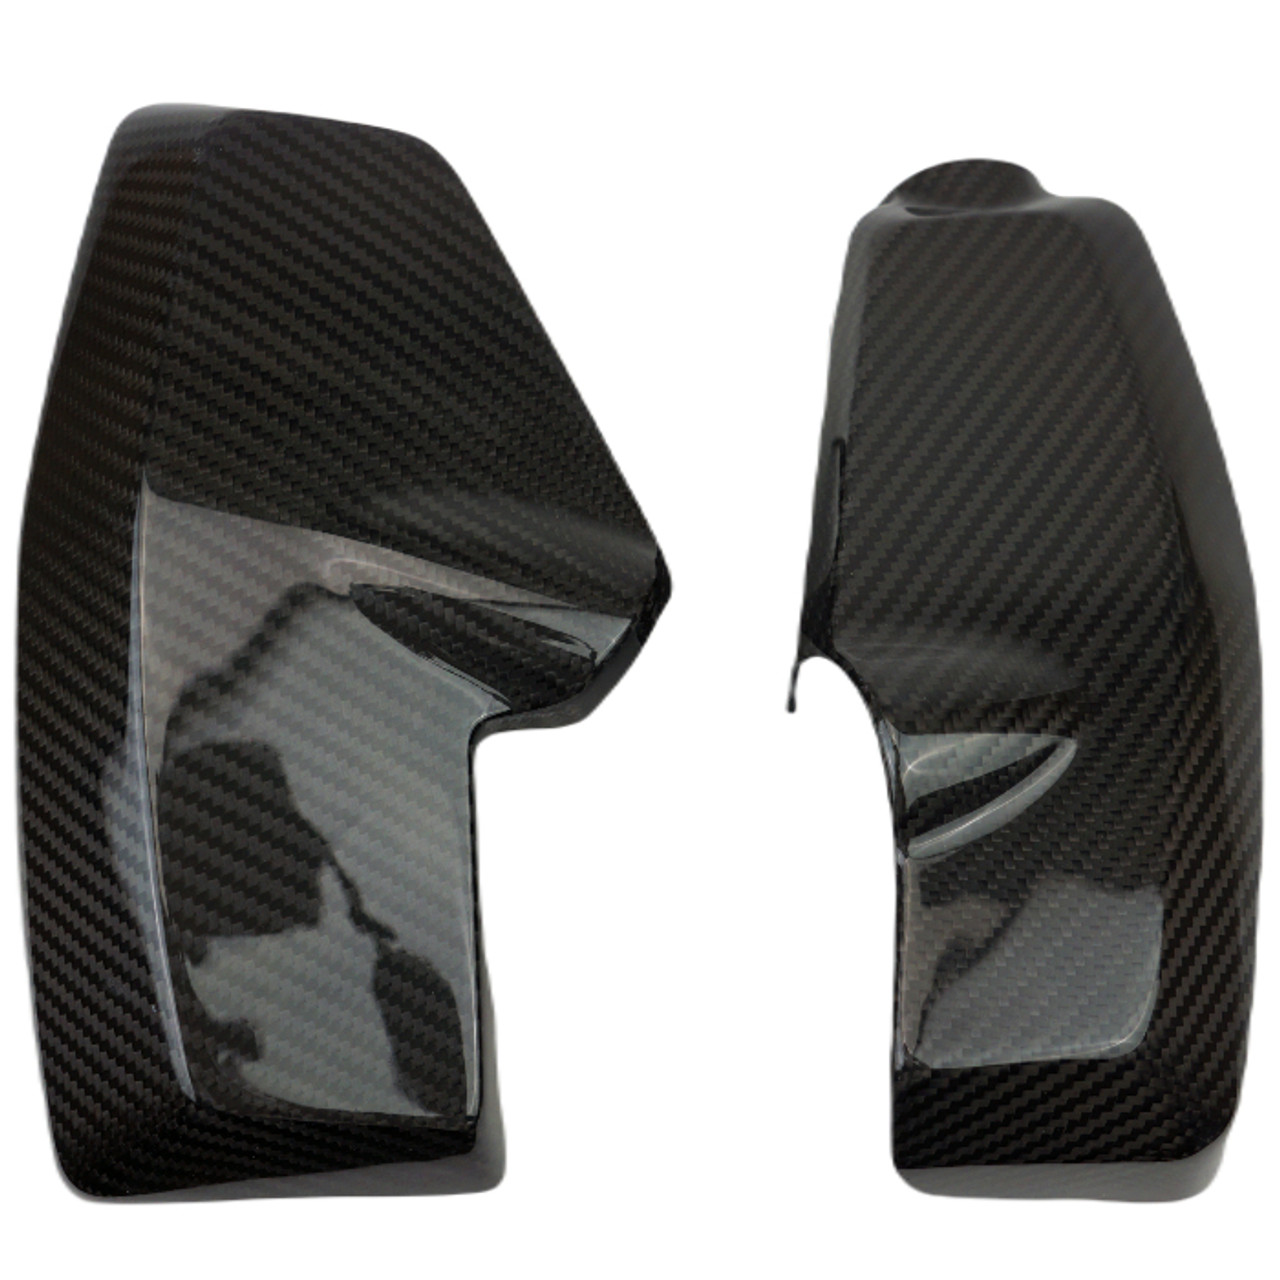 Radiator Covers in Glossy Twill Weave Carbon Fiber for Harley-Davidson Sportster S 

